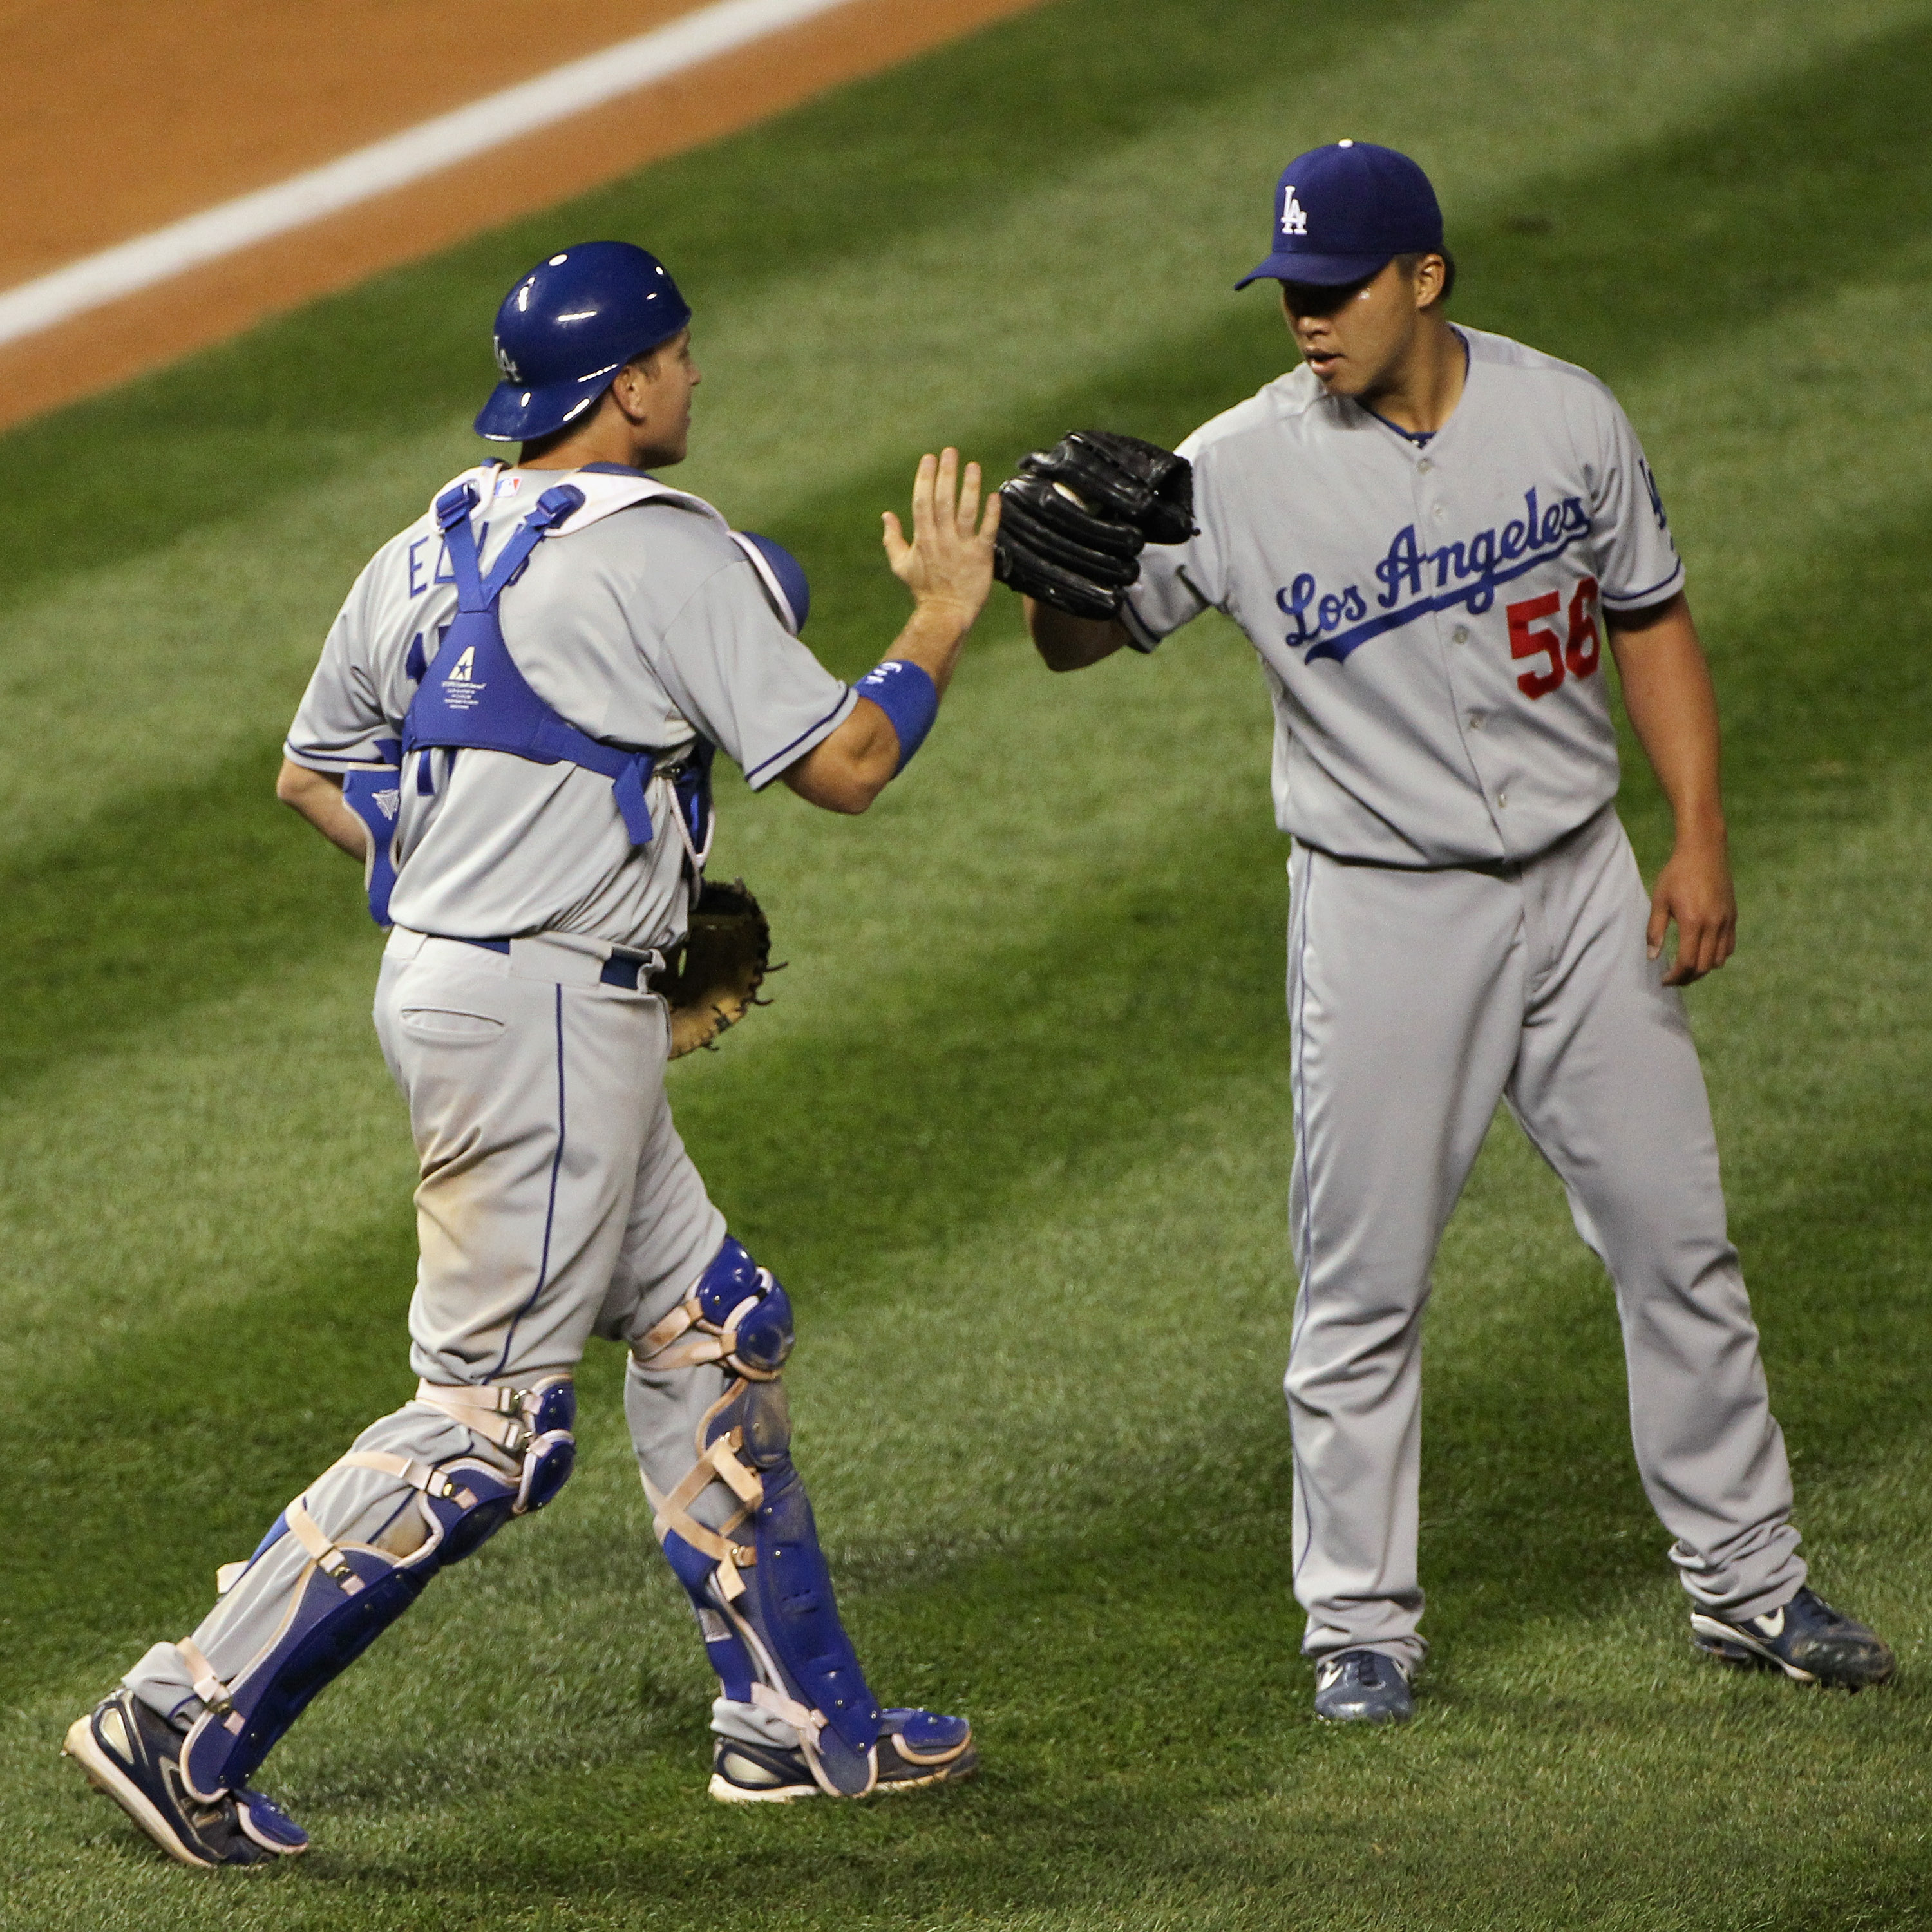 DENVER - SEPTEMBER 27:  Catcher A.J. Ellis #17 and relief pitcher Hong-Chih Kuo #56 of the Los Angeles Dodgers celebrate after the final out against the Colorado Rockies at Coors Field on September 25, 2010 in Denver, Colorado. Kuo earned the save as the